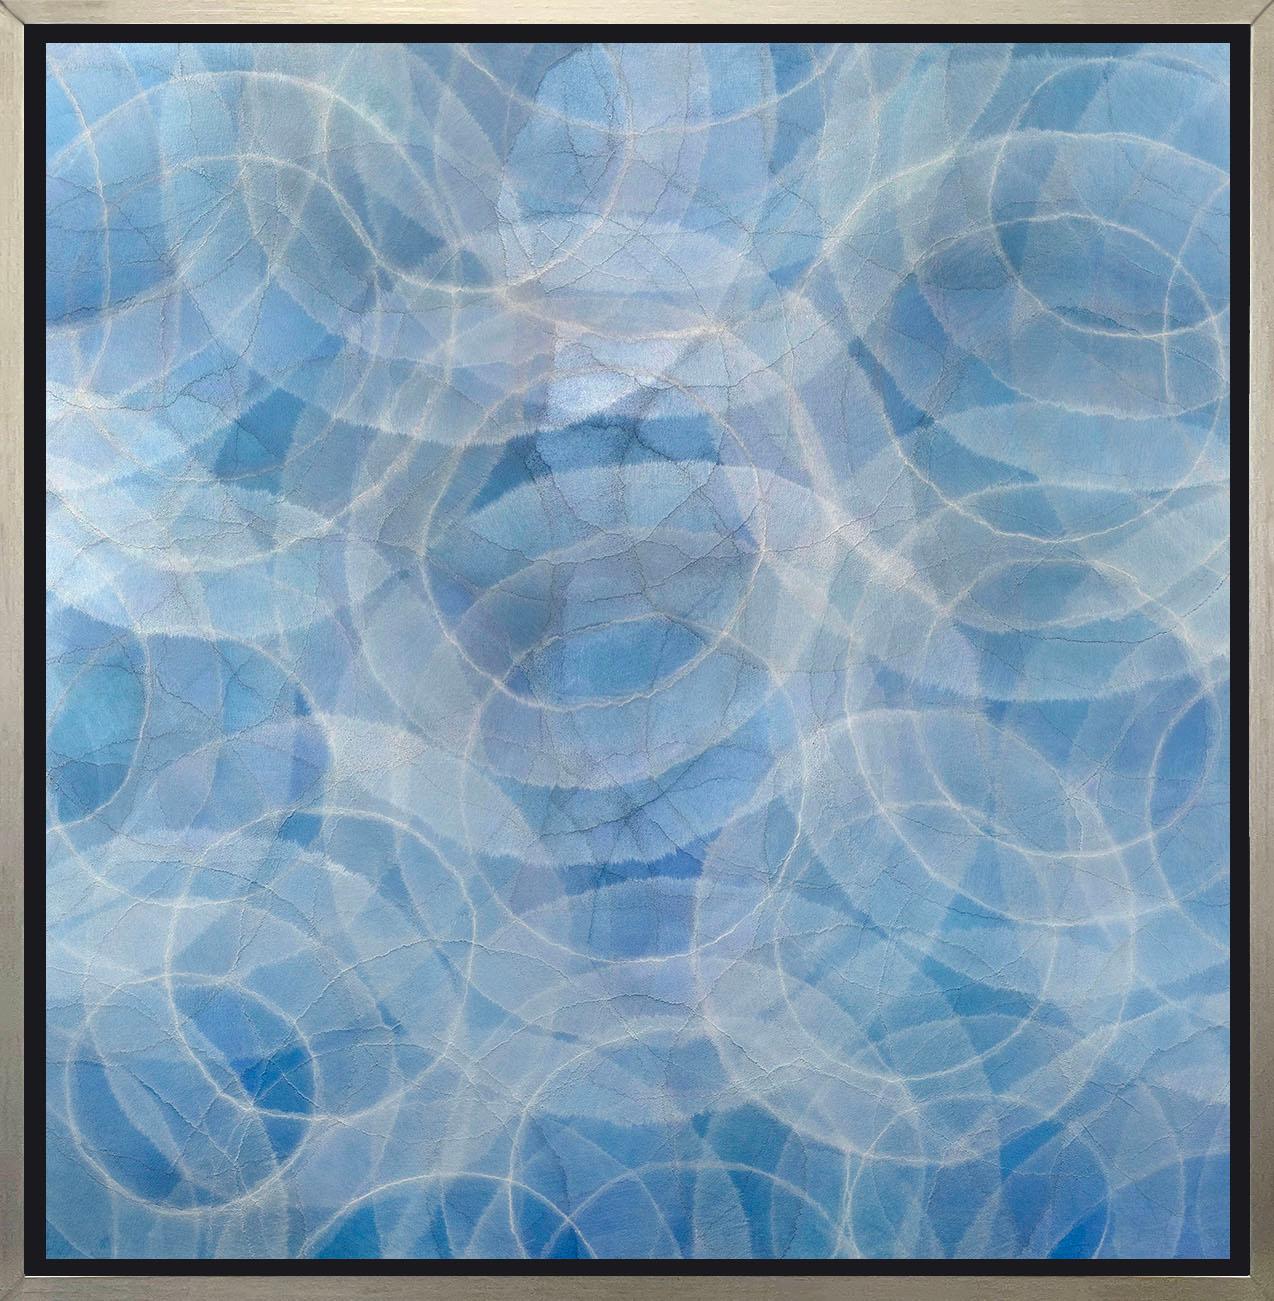 Roger Mudre Abstract Print - "Boeotia, " Framed Limited Edition Giclee Print, 53" x 53"